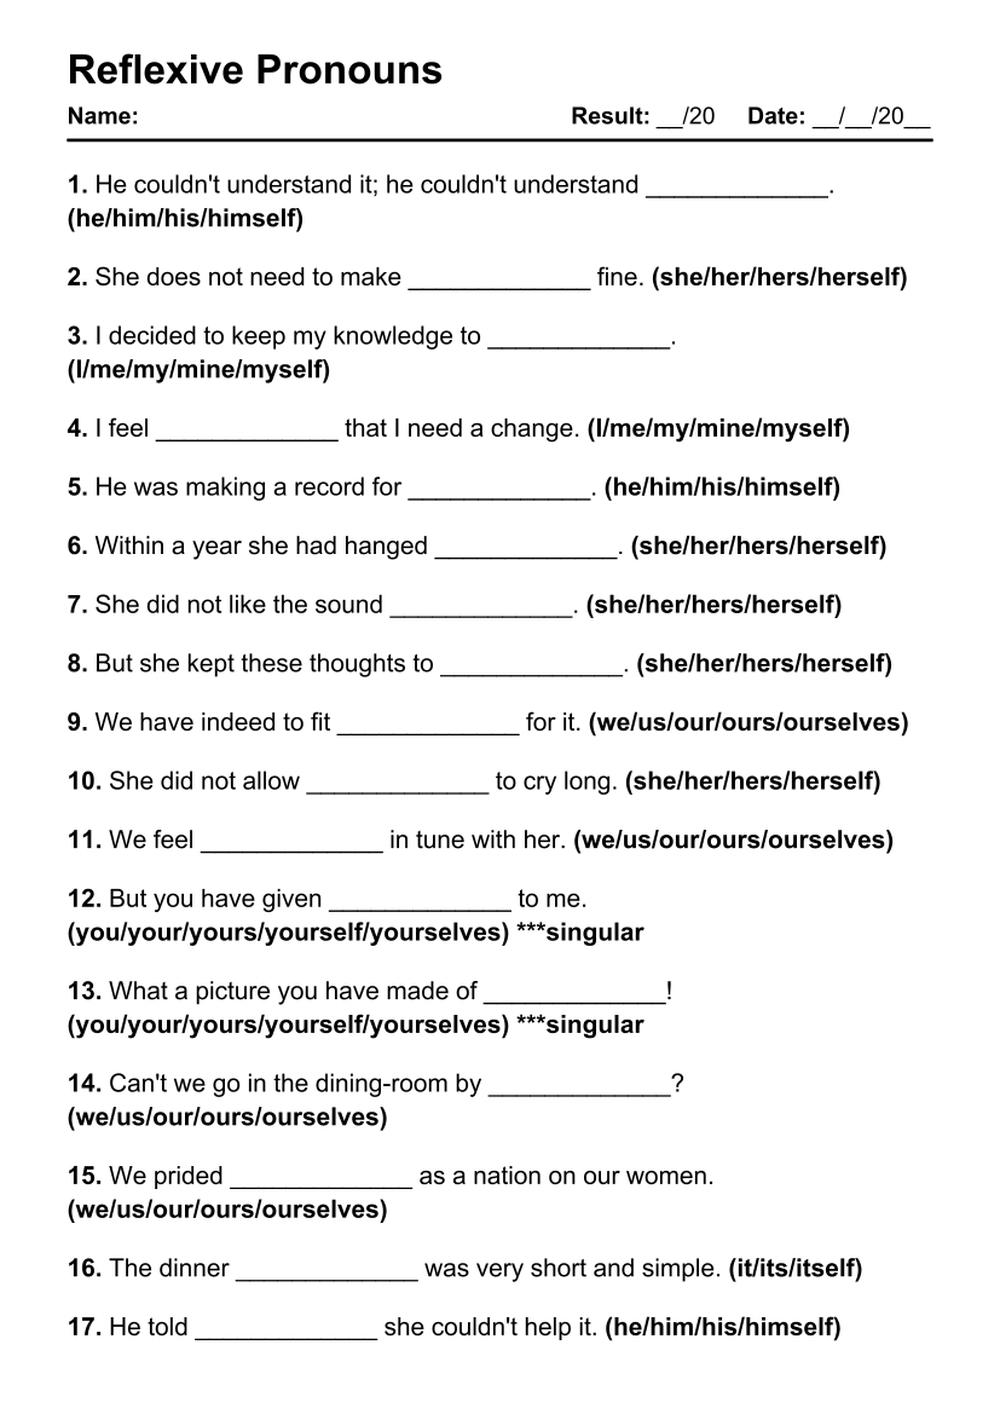 Printable Reflexive Pronouns Exercises - PDF Worksheet with Answers - Test 21